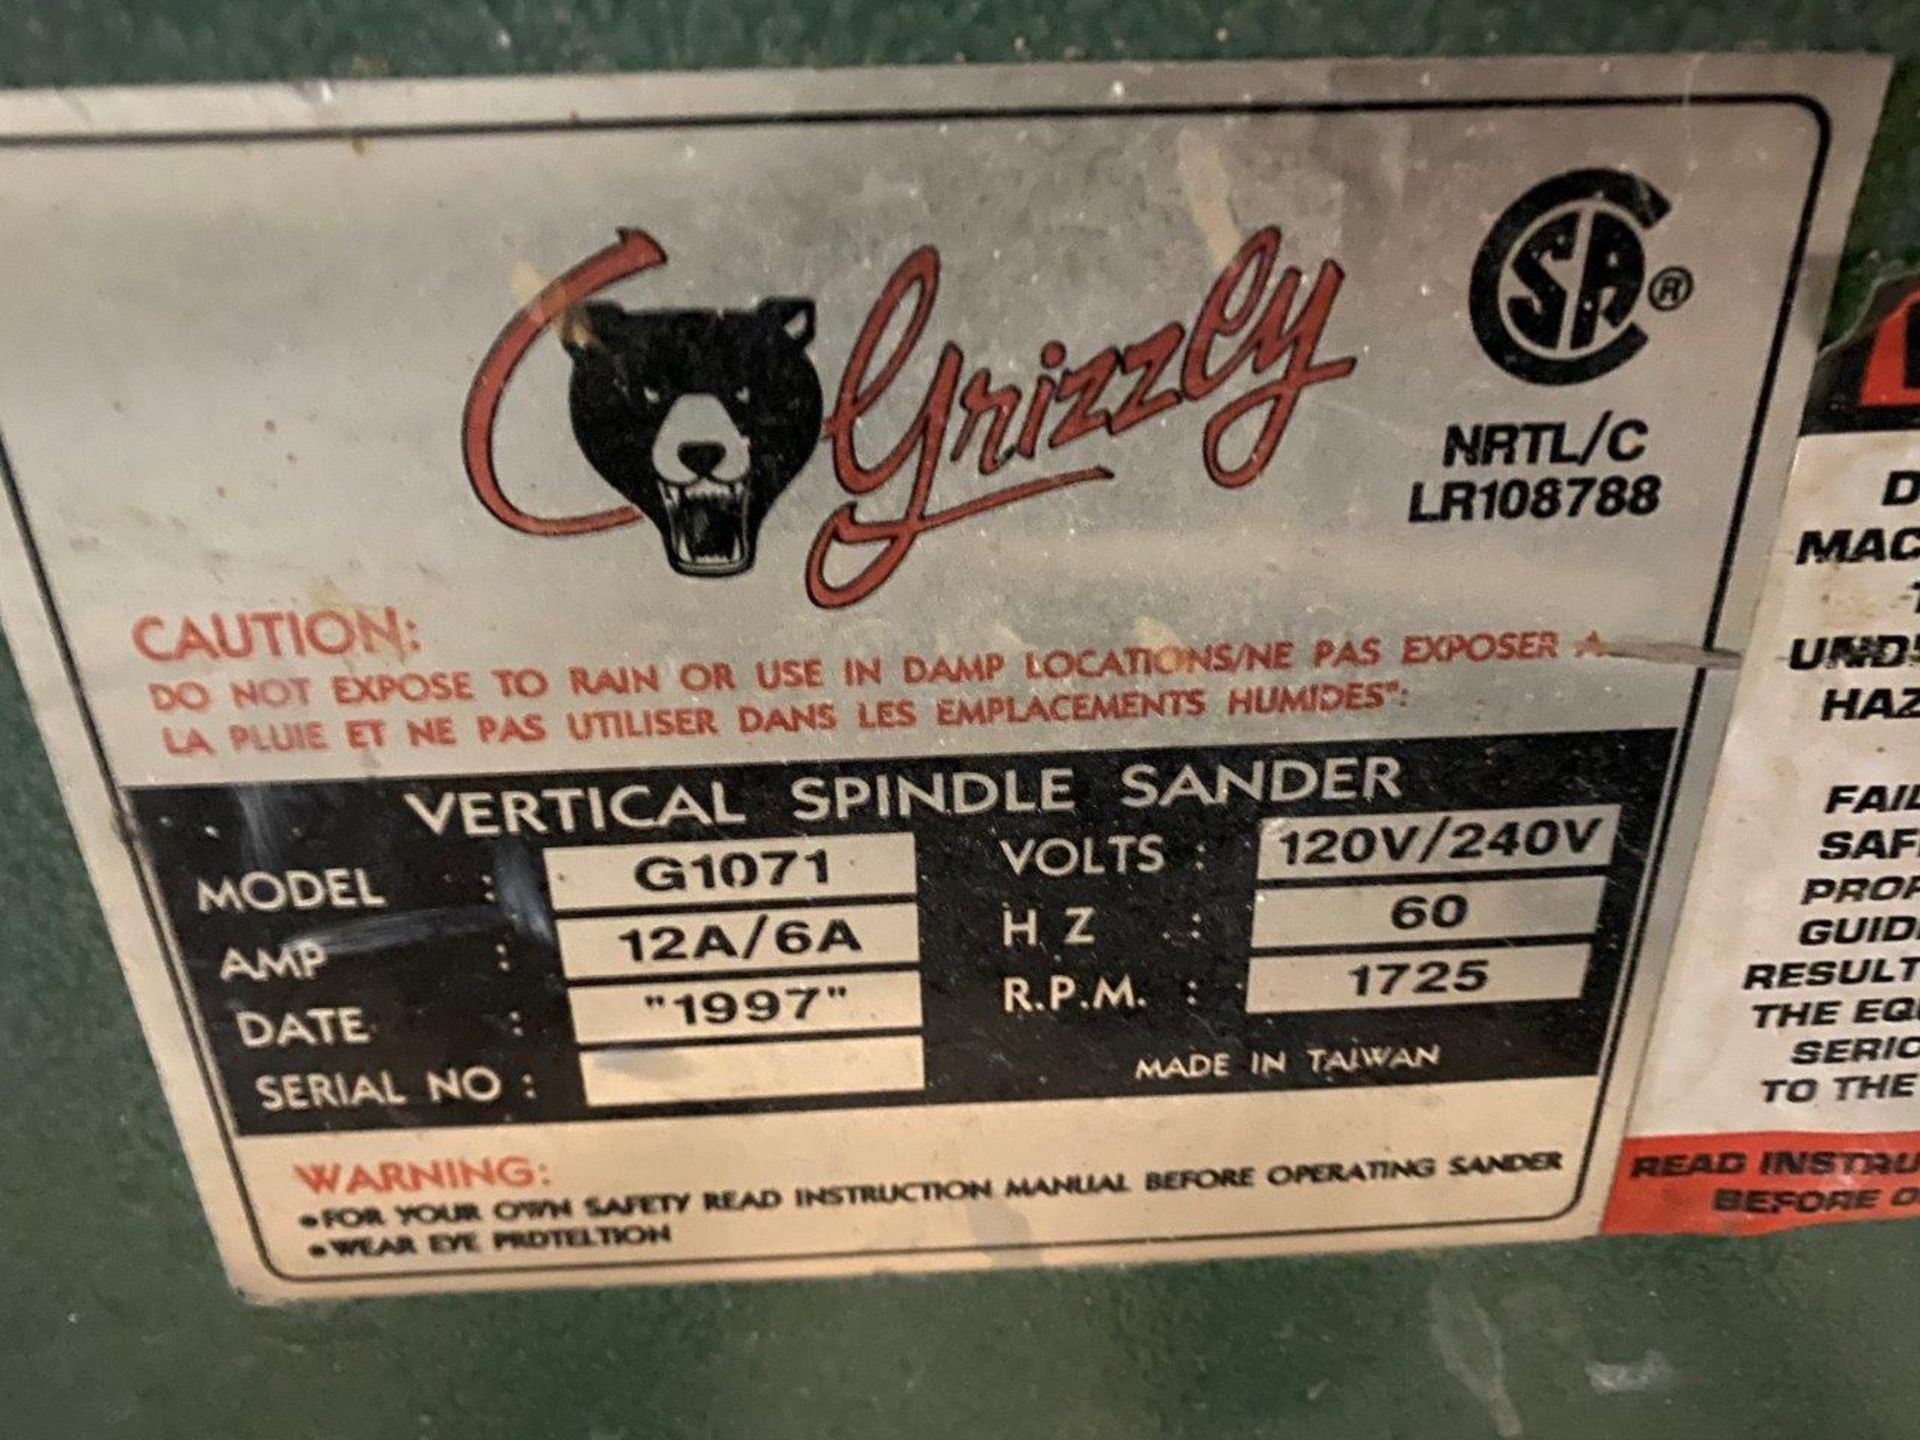 Grizzly Vertical Spindle Sander G1071 - Image 5 of 6